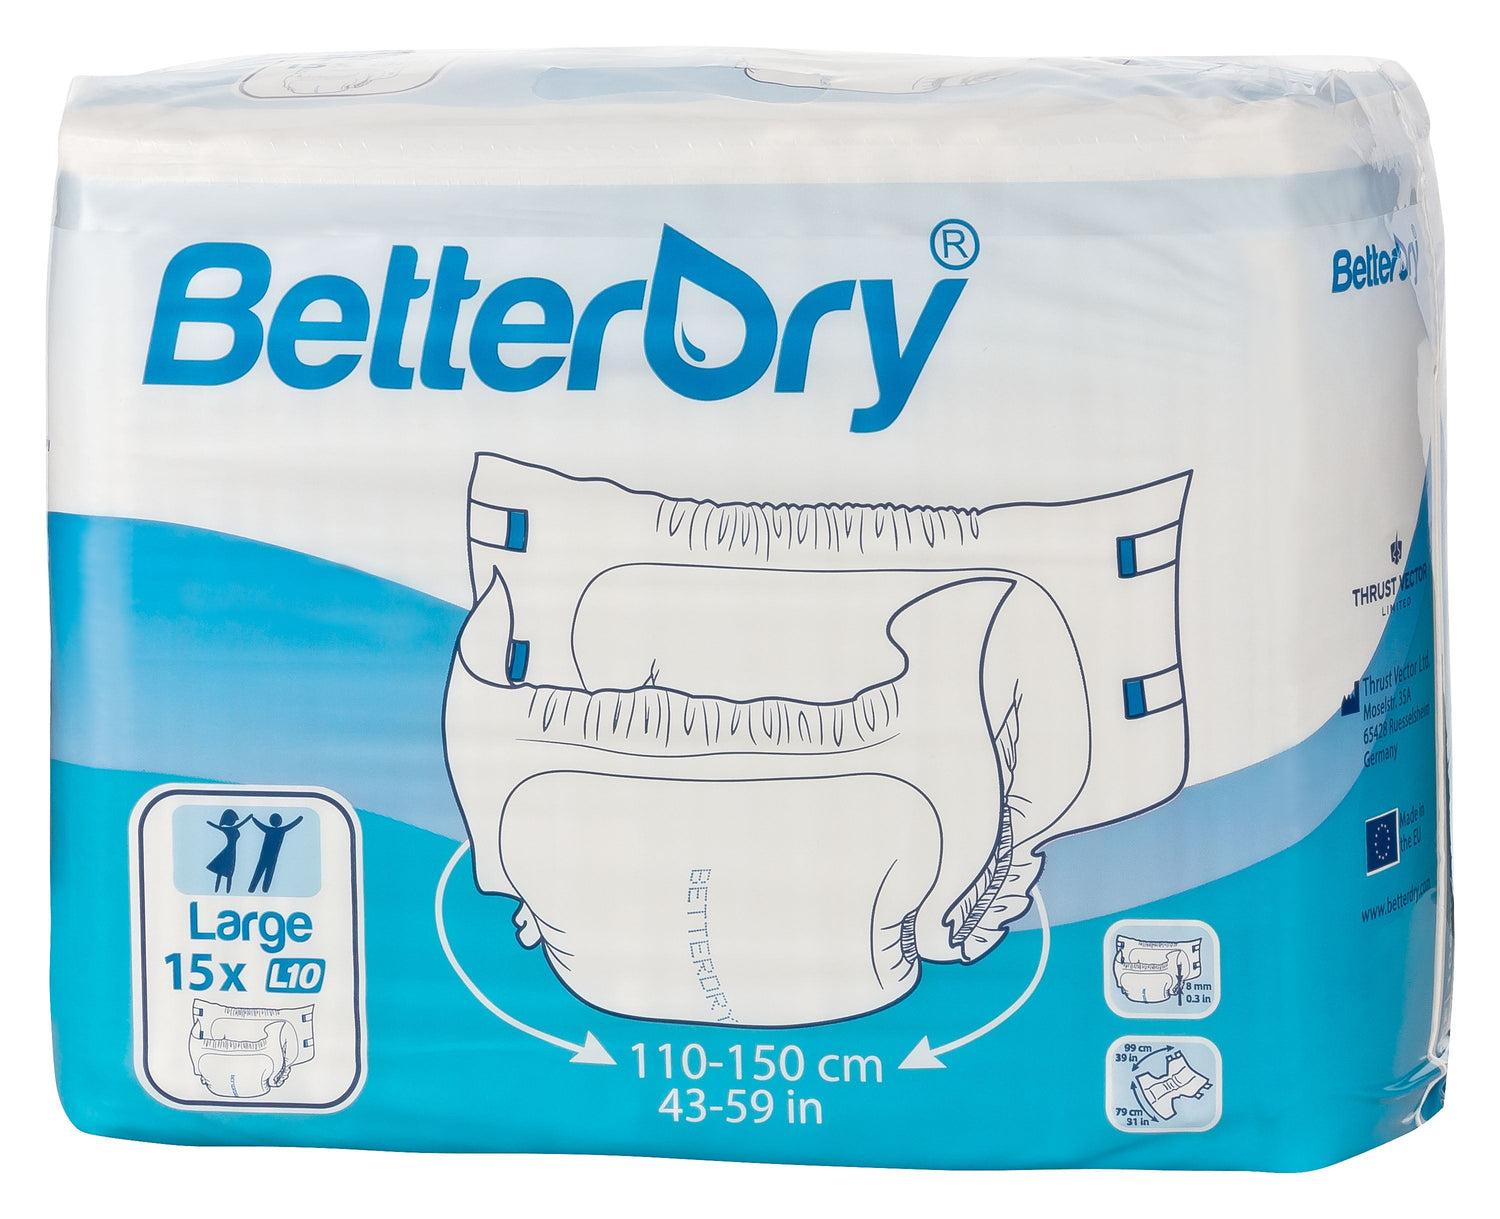 BetterDry 10 adult diaper large polybag - for maximum protection for heavy incontinence.